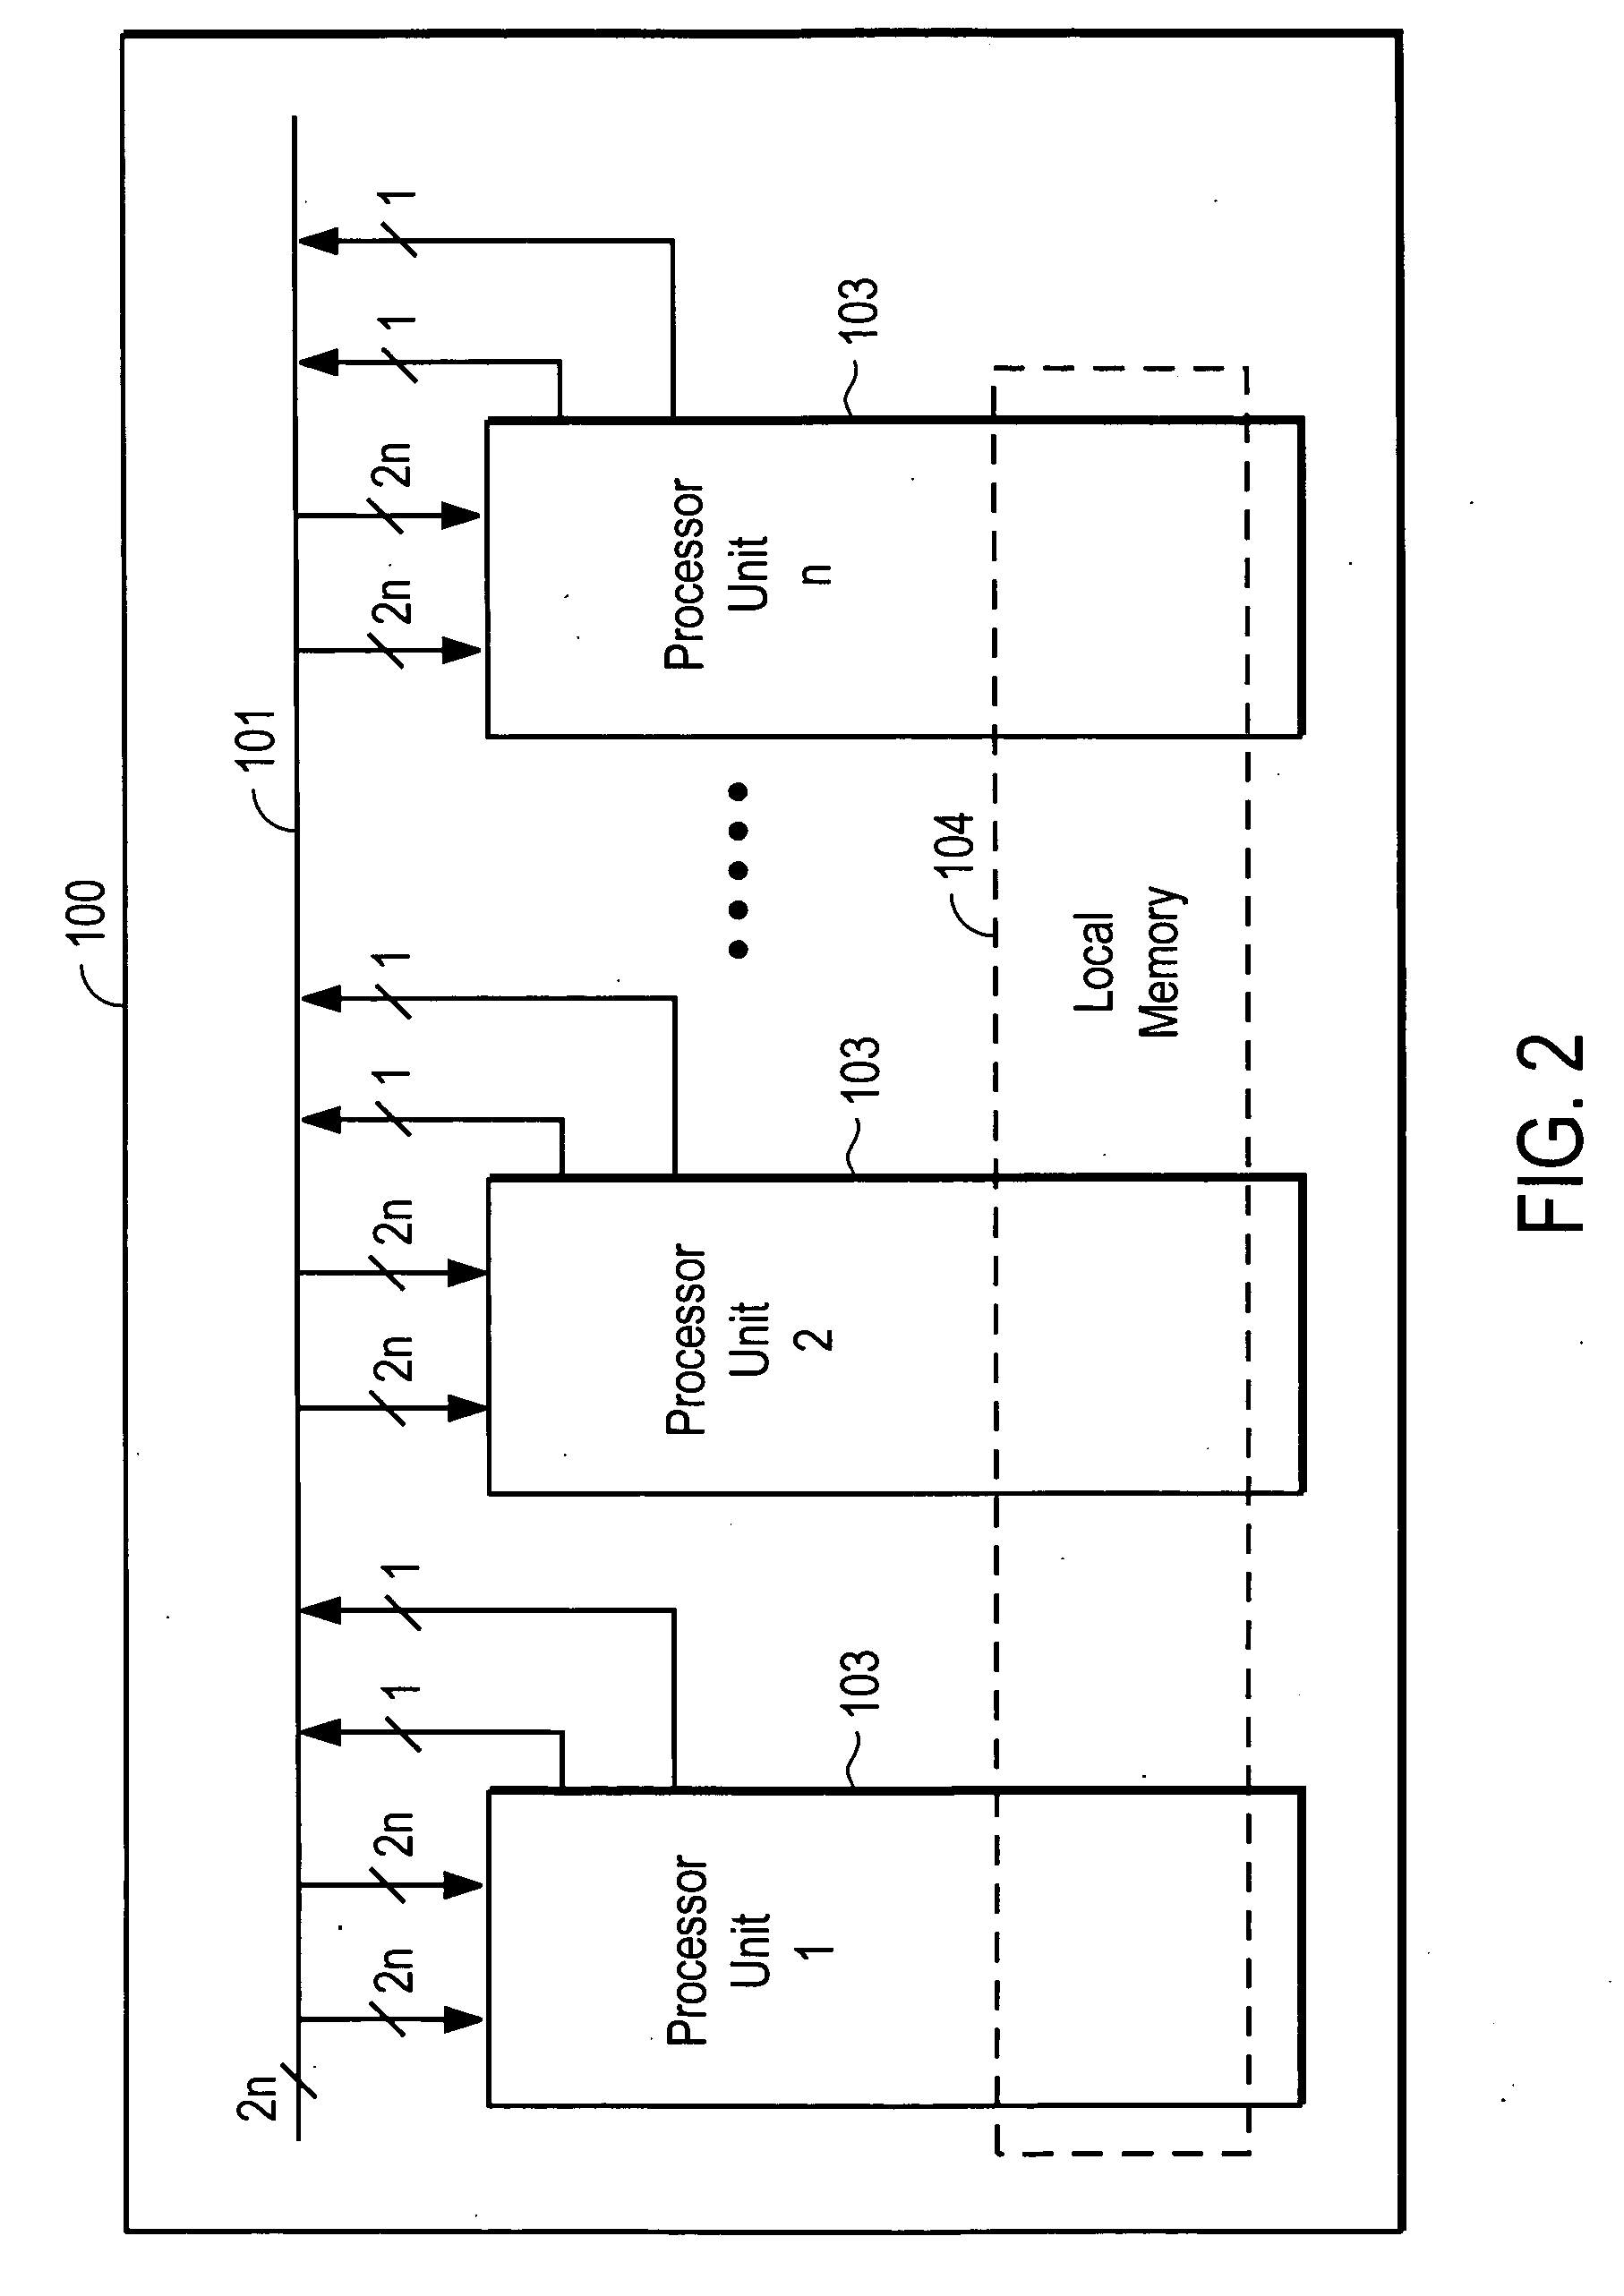 Hardware acceleration system for logic simulation using shift register as local cache with path for bypassing shift register